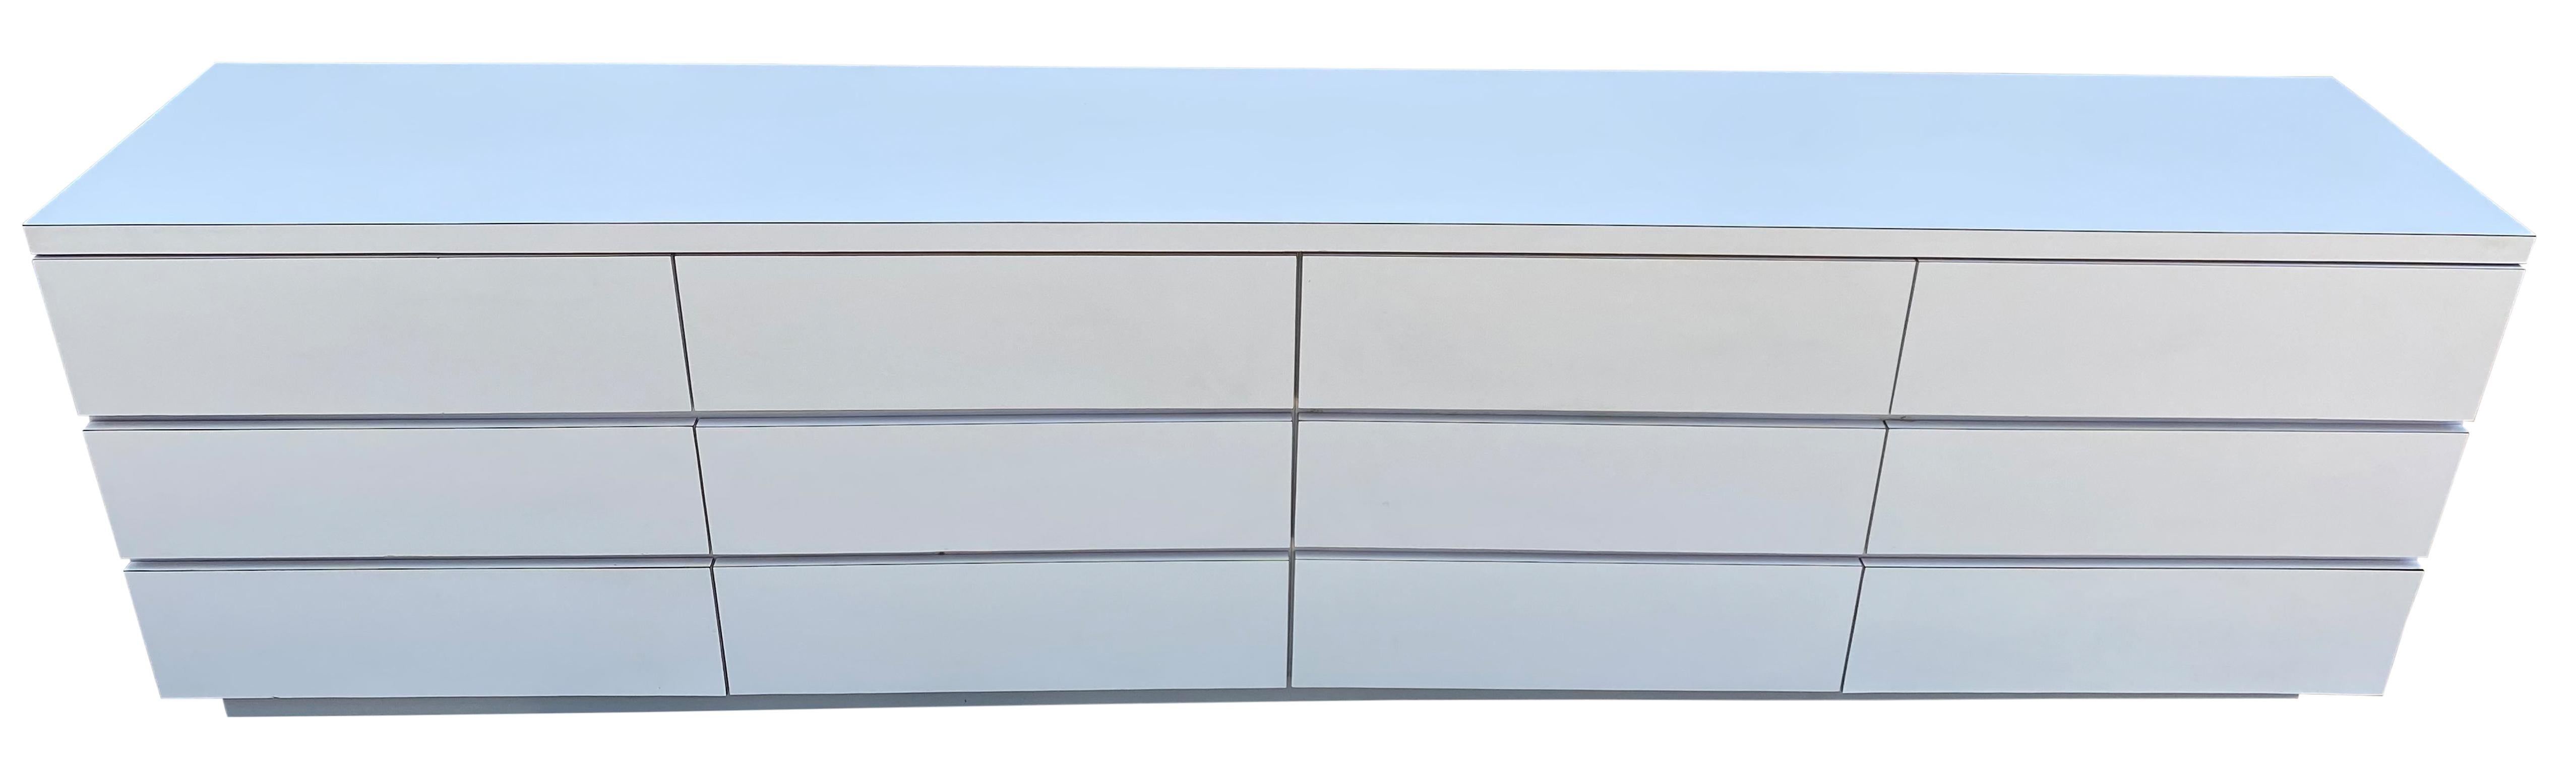 Very long matte white Formica laminate plywood custom 12-drawer dresser credenza, circa 1980s custom made to fit in a bedroom. Comes apart in 4 sections easy to move and assemble and set up as a floor dresser of mount on a wall as a floating